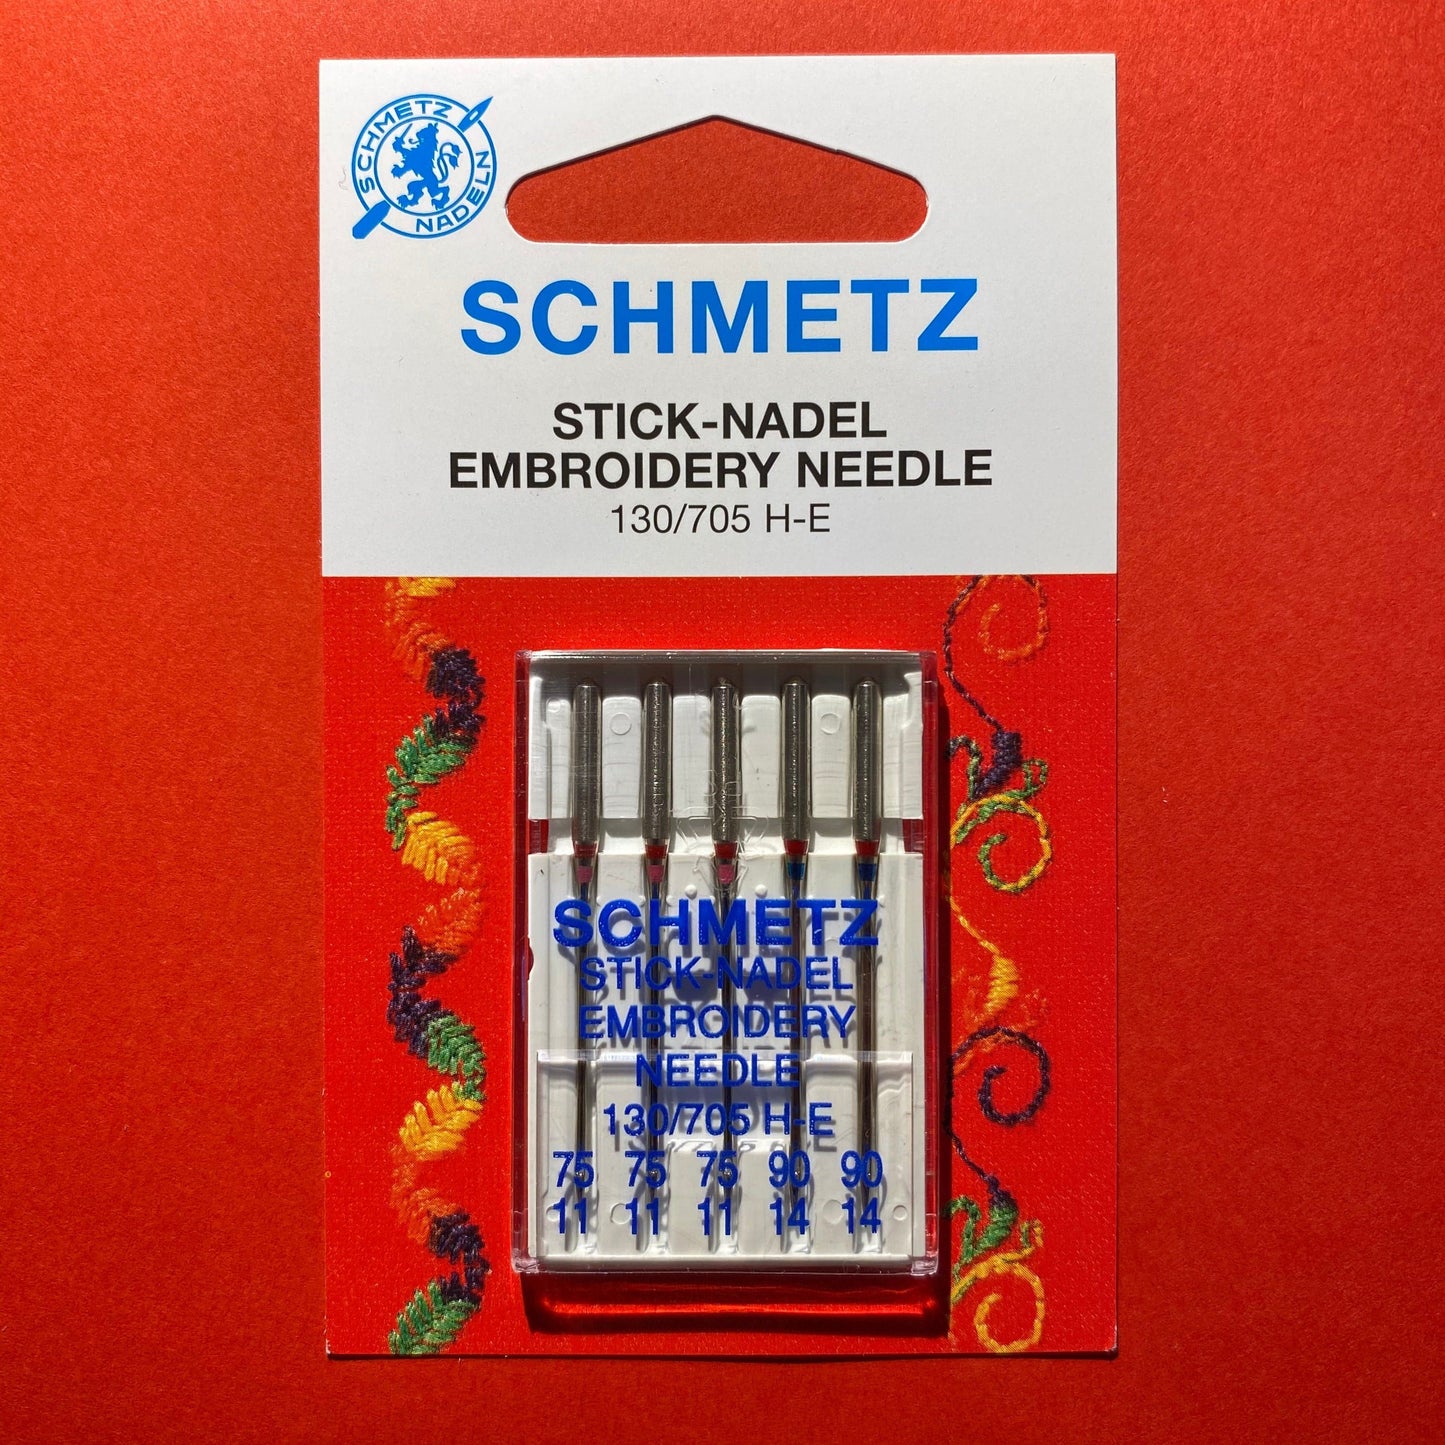 Schmetz Embroidery Needles 130/705H-E 75/11 and 90/14 - 5 pack